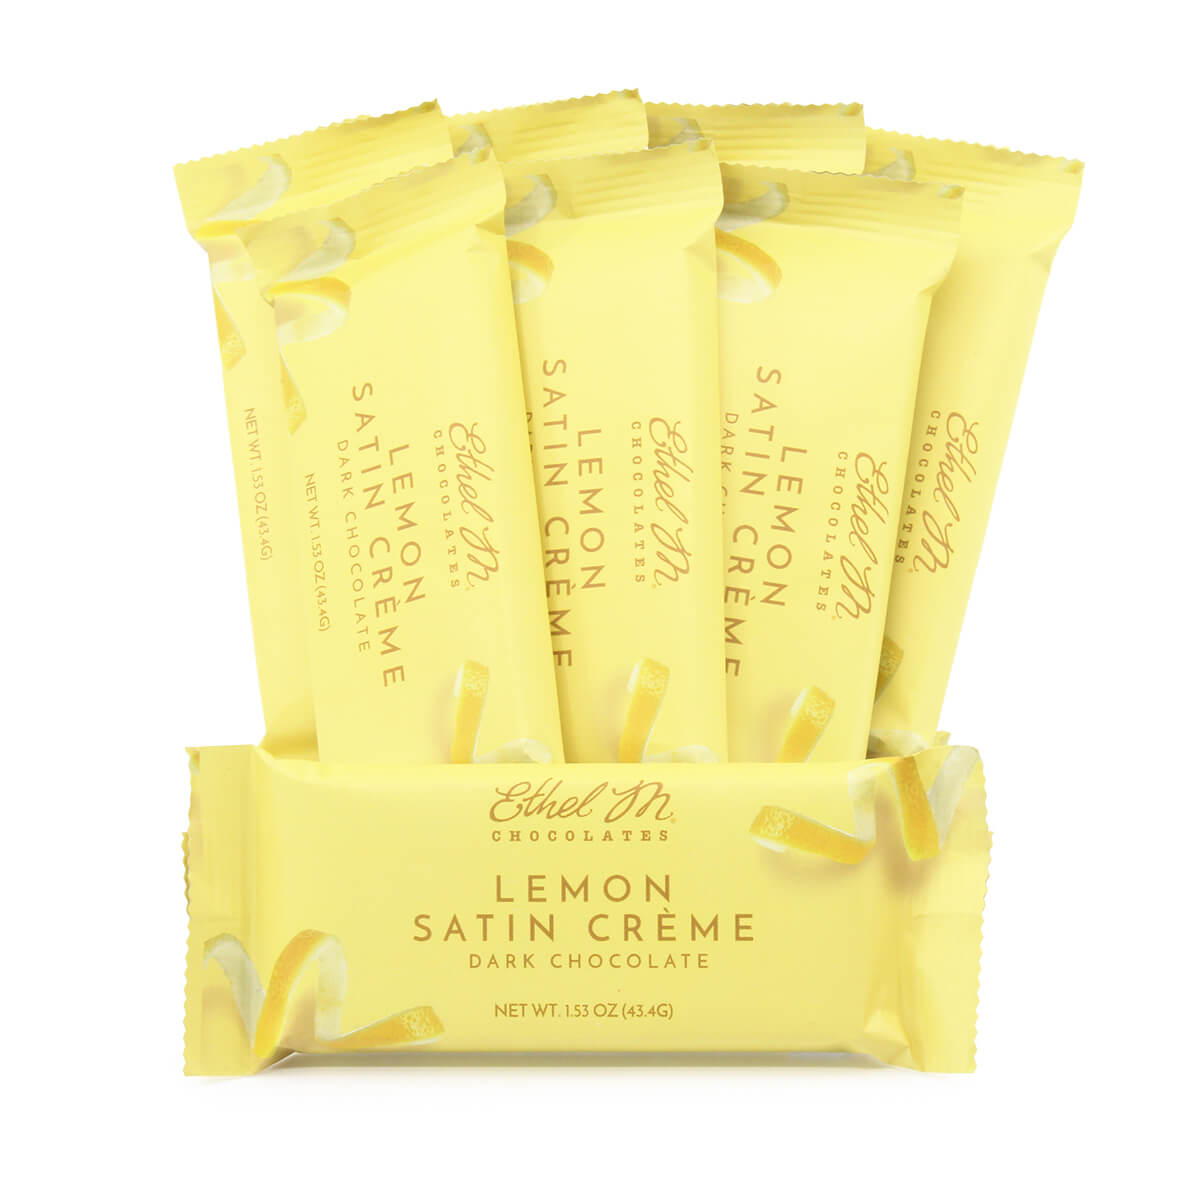 Grab and go with our best-selling Lemon Satin Creme Bar! Each bar is made of premium cream and lemon puree and can be bought in a set of 8.